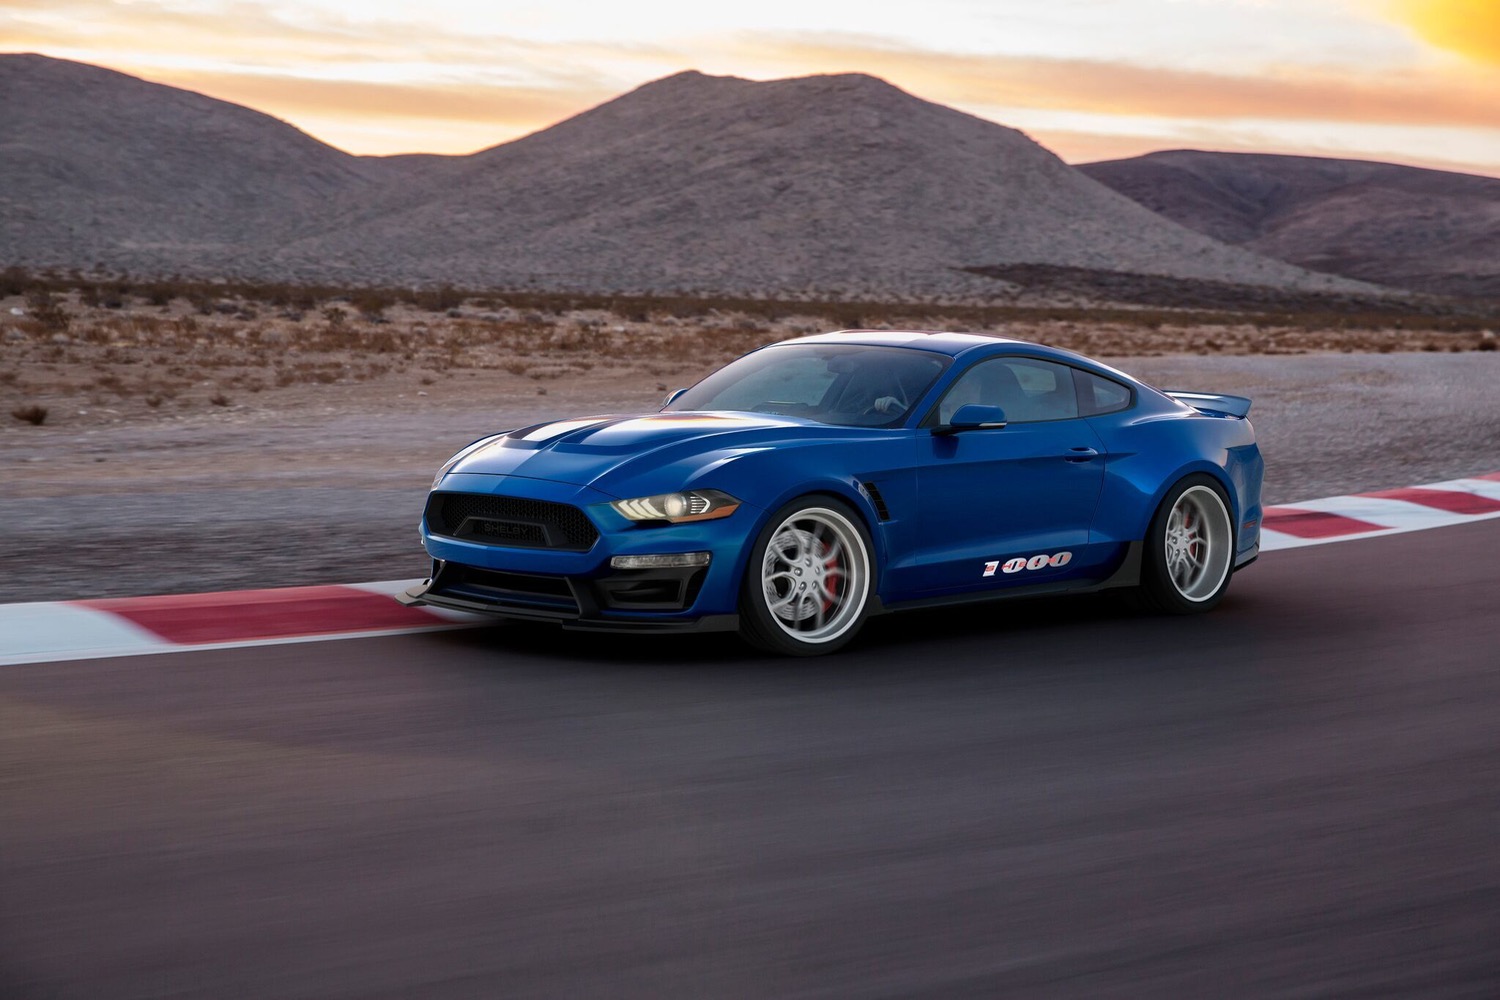 2018 Shelby 1000 Mustang